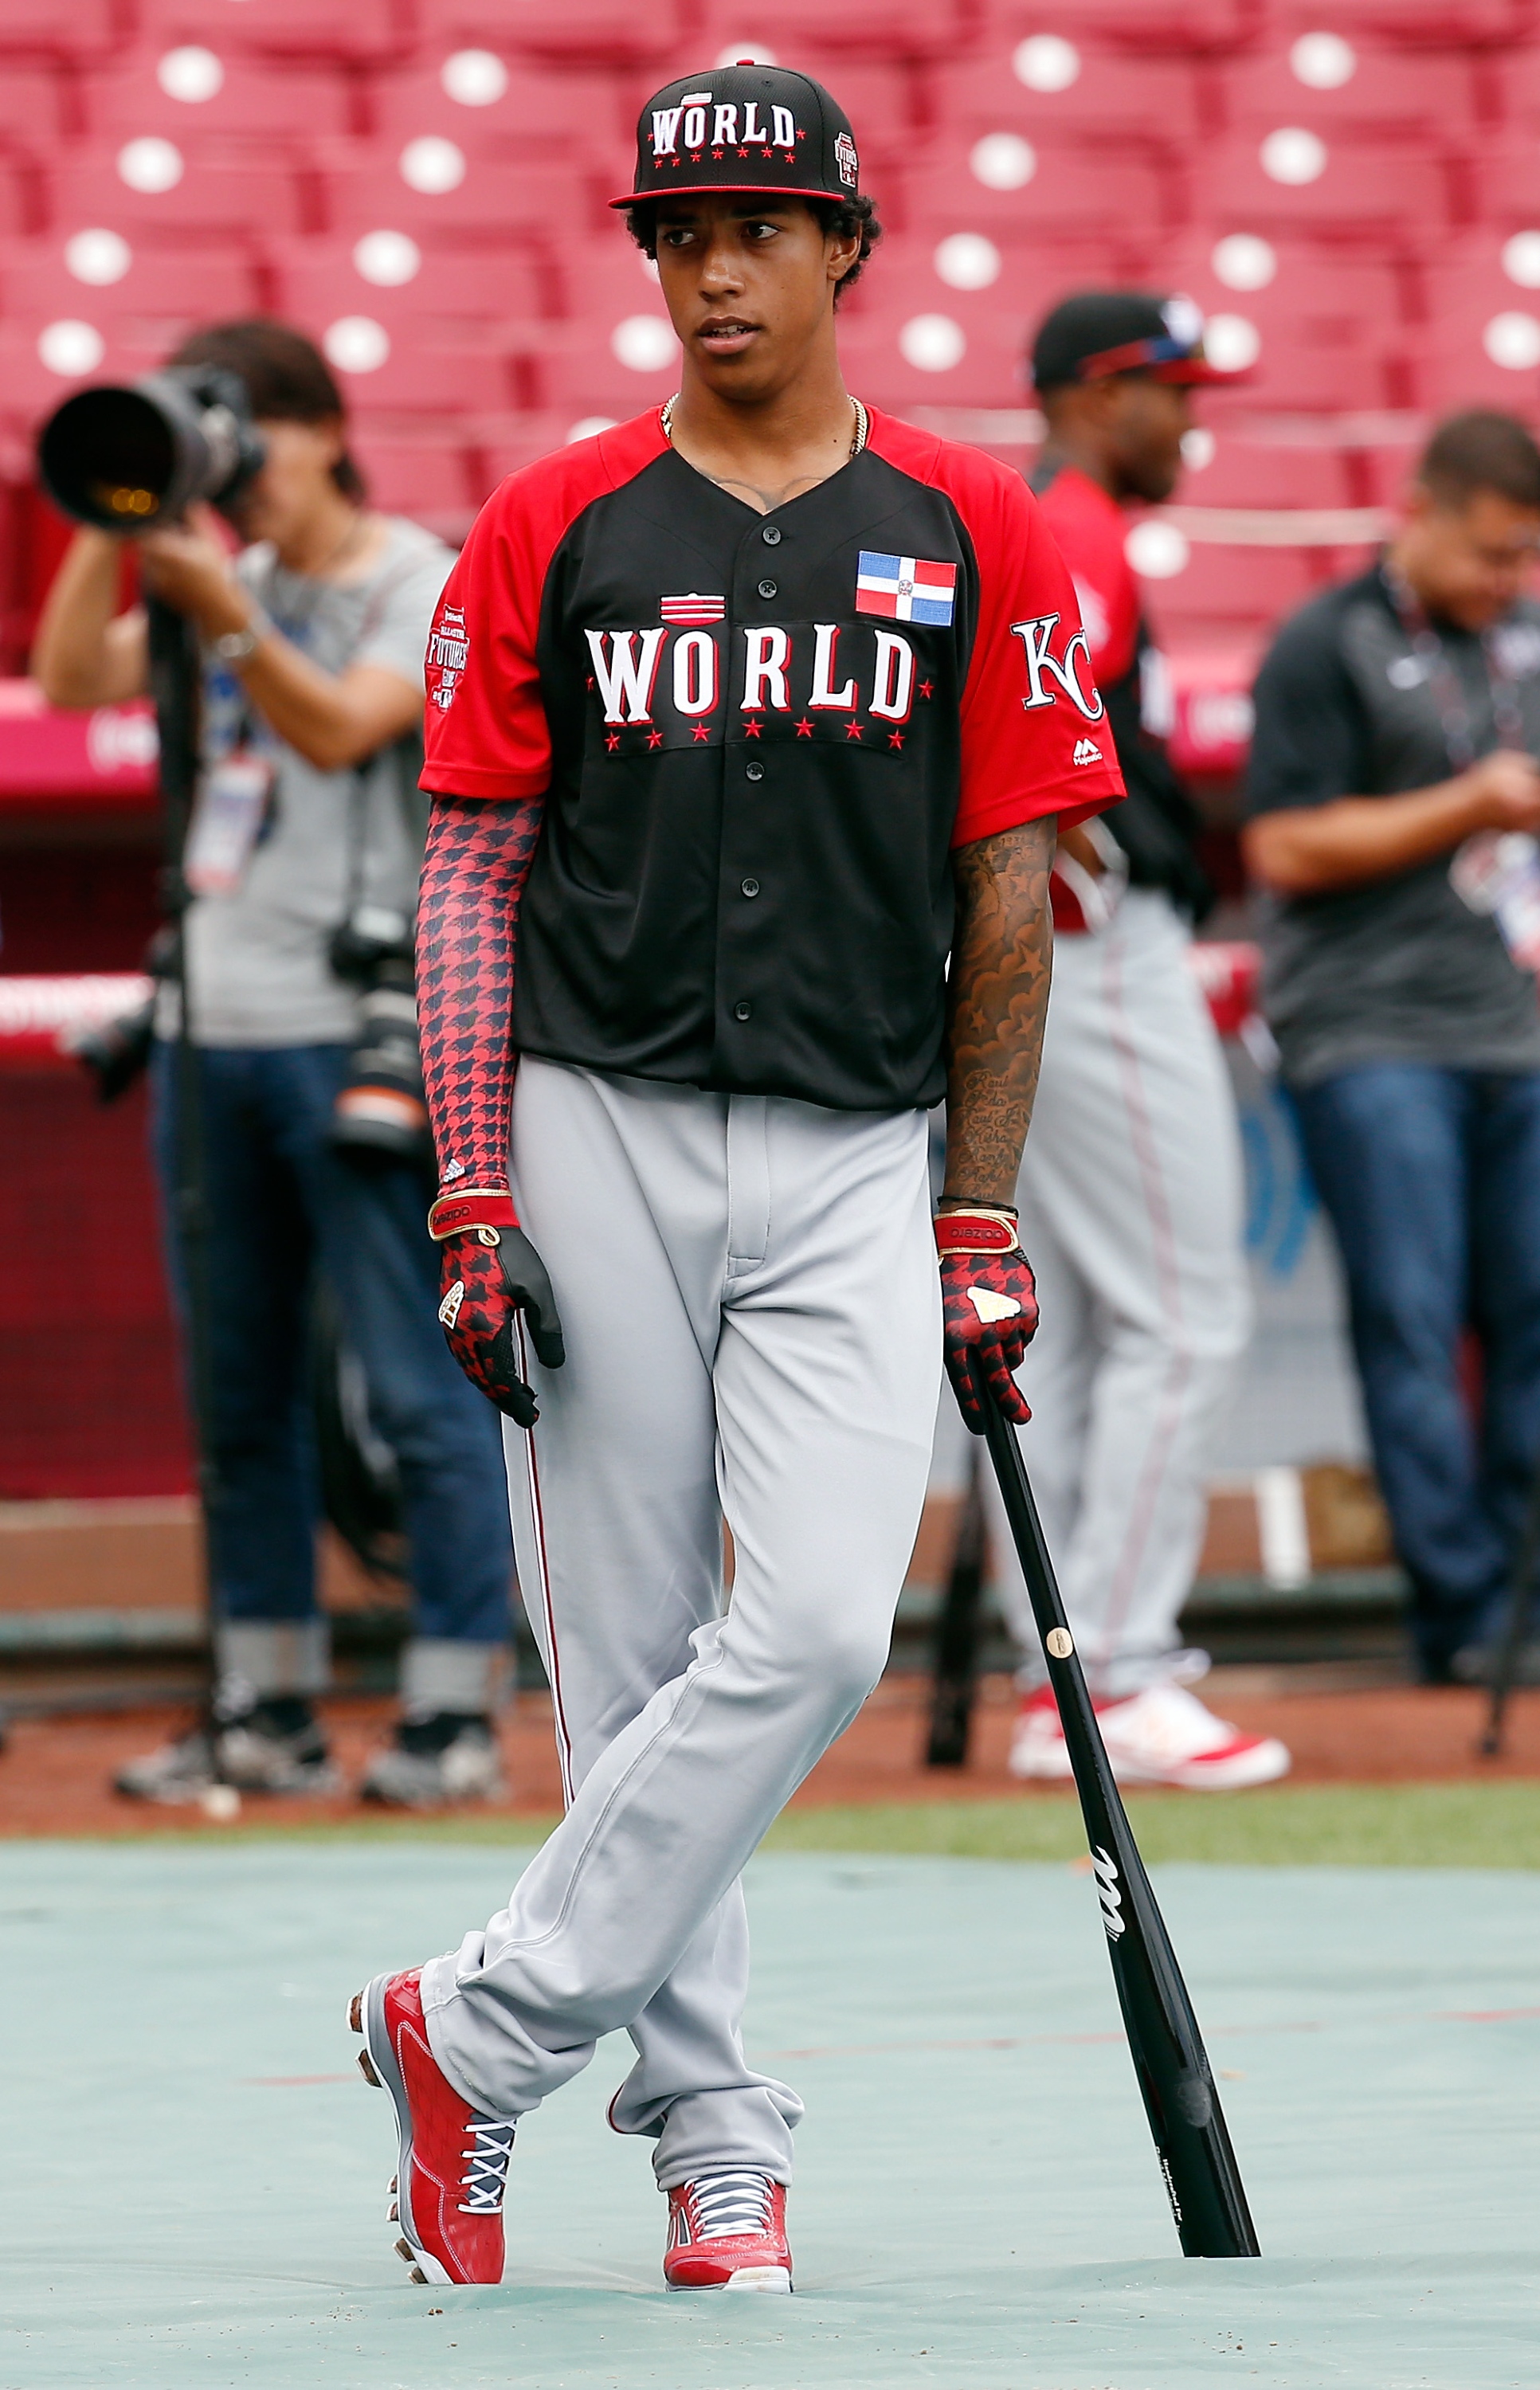 CINCINNATI, OH - JULY 12:  Raul Mondesi of the World Team looks on during batting practice before the SiriusXM All-Star Futures Game at the Great American Ball Park on July 12, 2015, in Cincinnati, Ohio.  (Photo by Rob Carr/Getty Images)